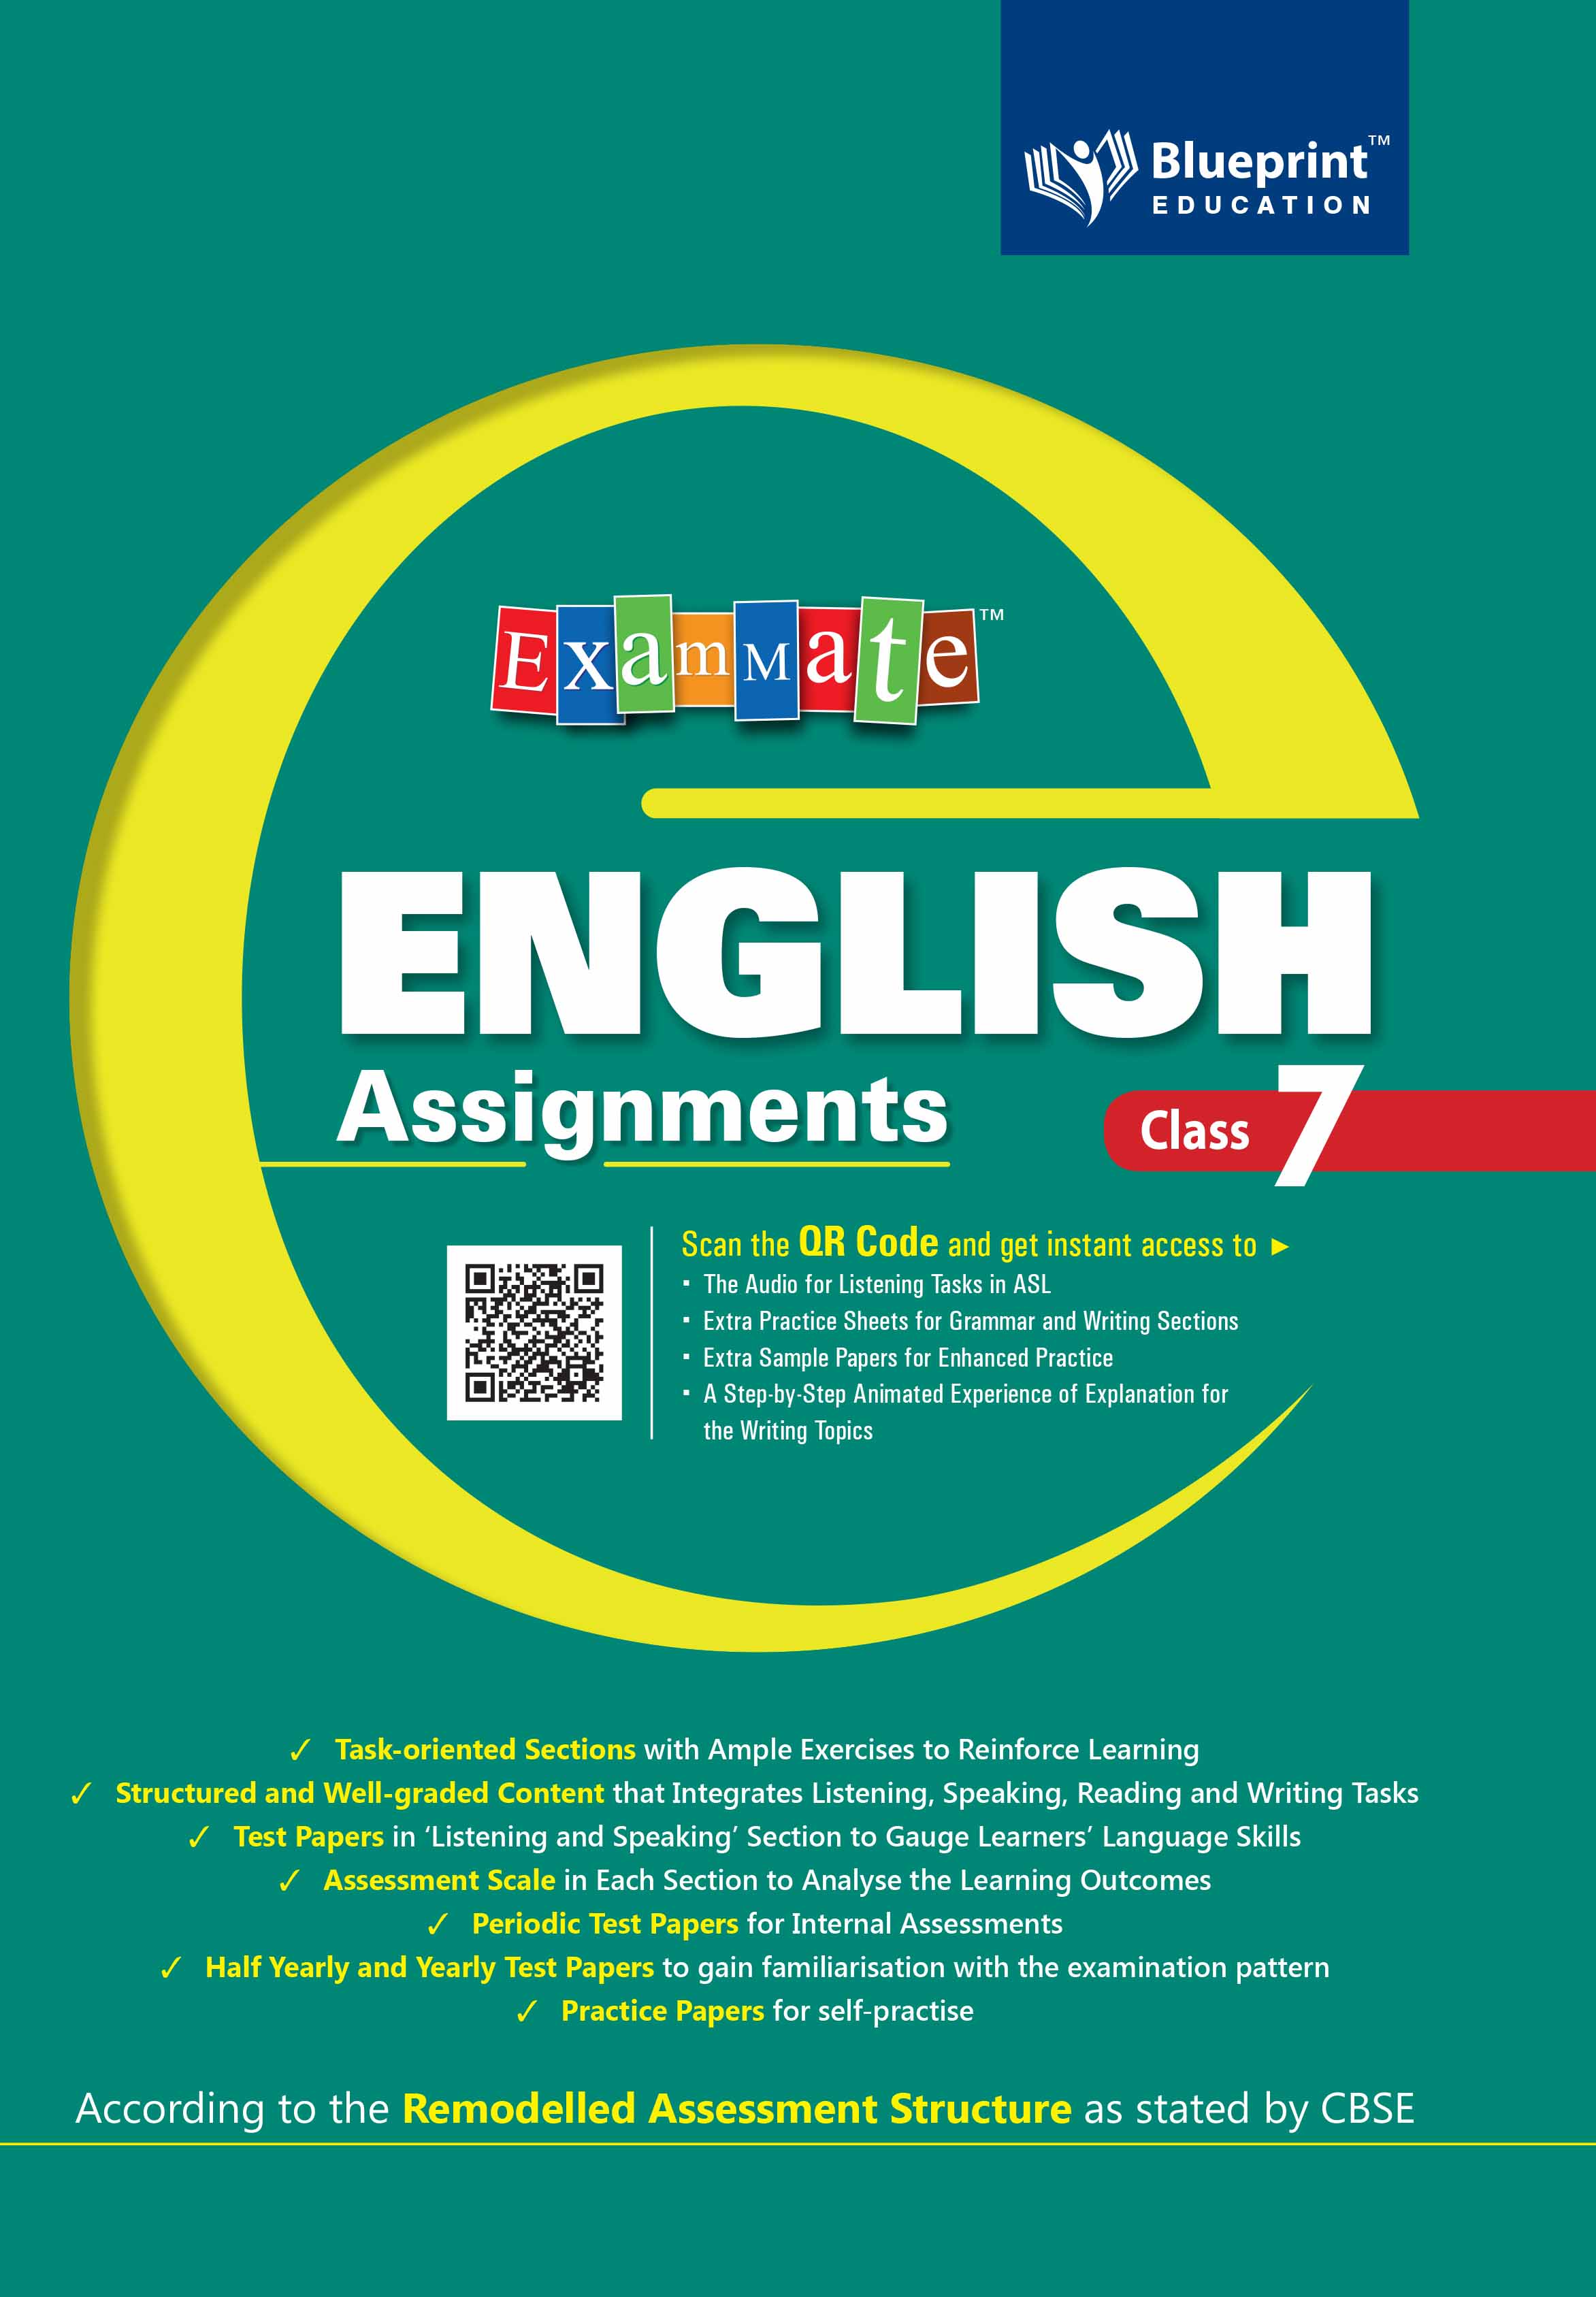 Exam Mate English Assignment Class 7 for CBSE Board